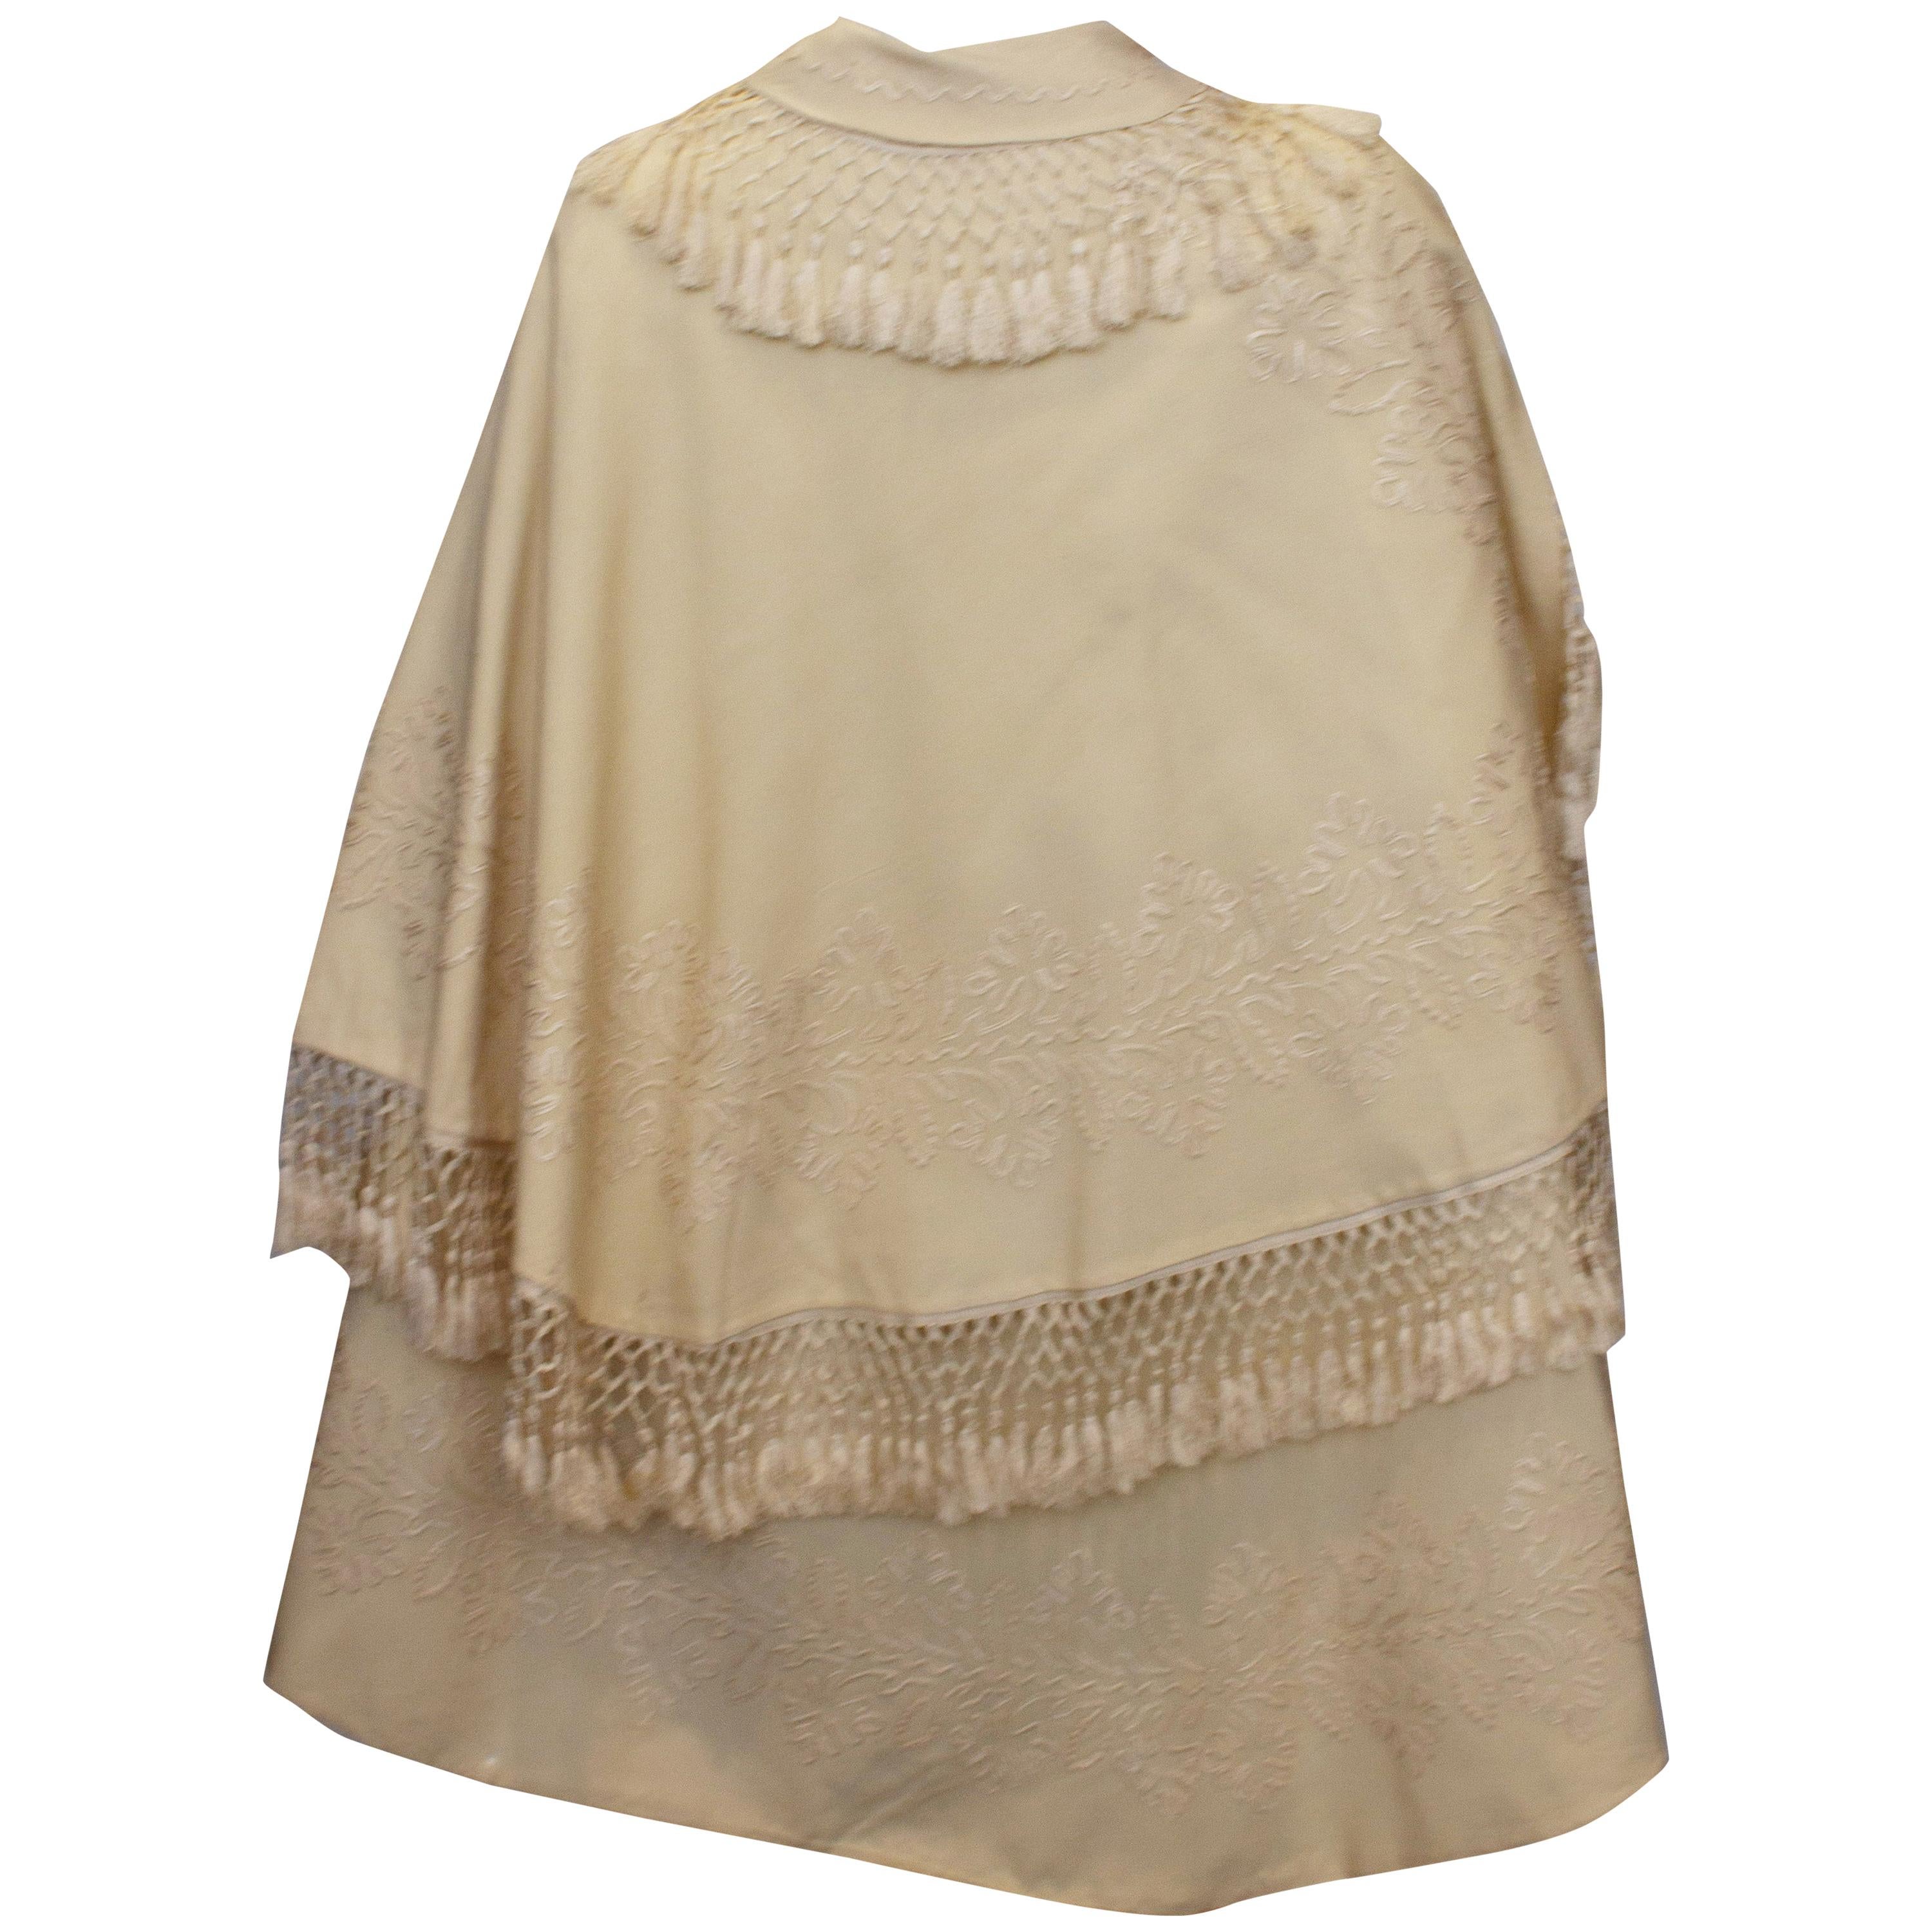 Vintage White Wool Cape with Embroidery and Fringing